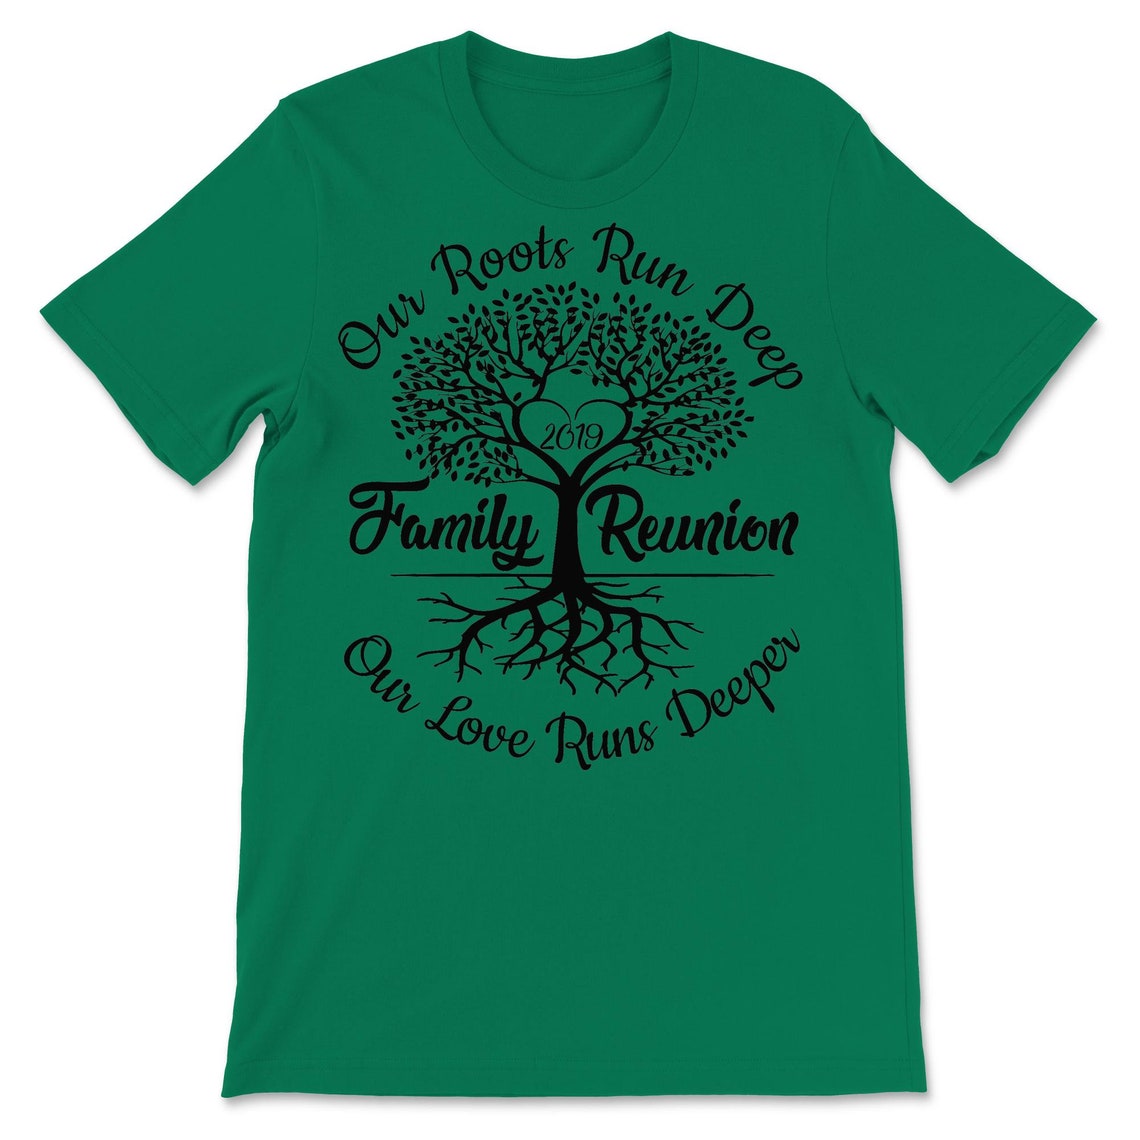 Our Roots Run Deep Our Love Runs Deeper 2019 Family Reunion | Etsy